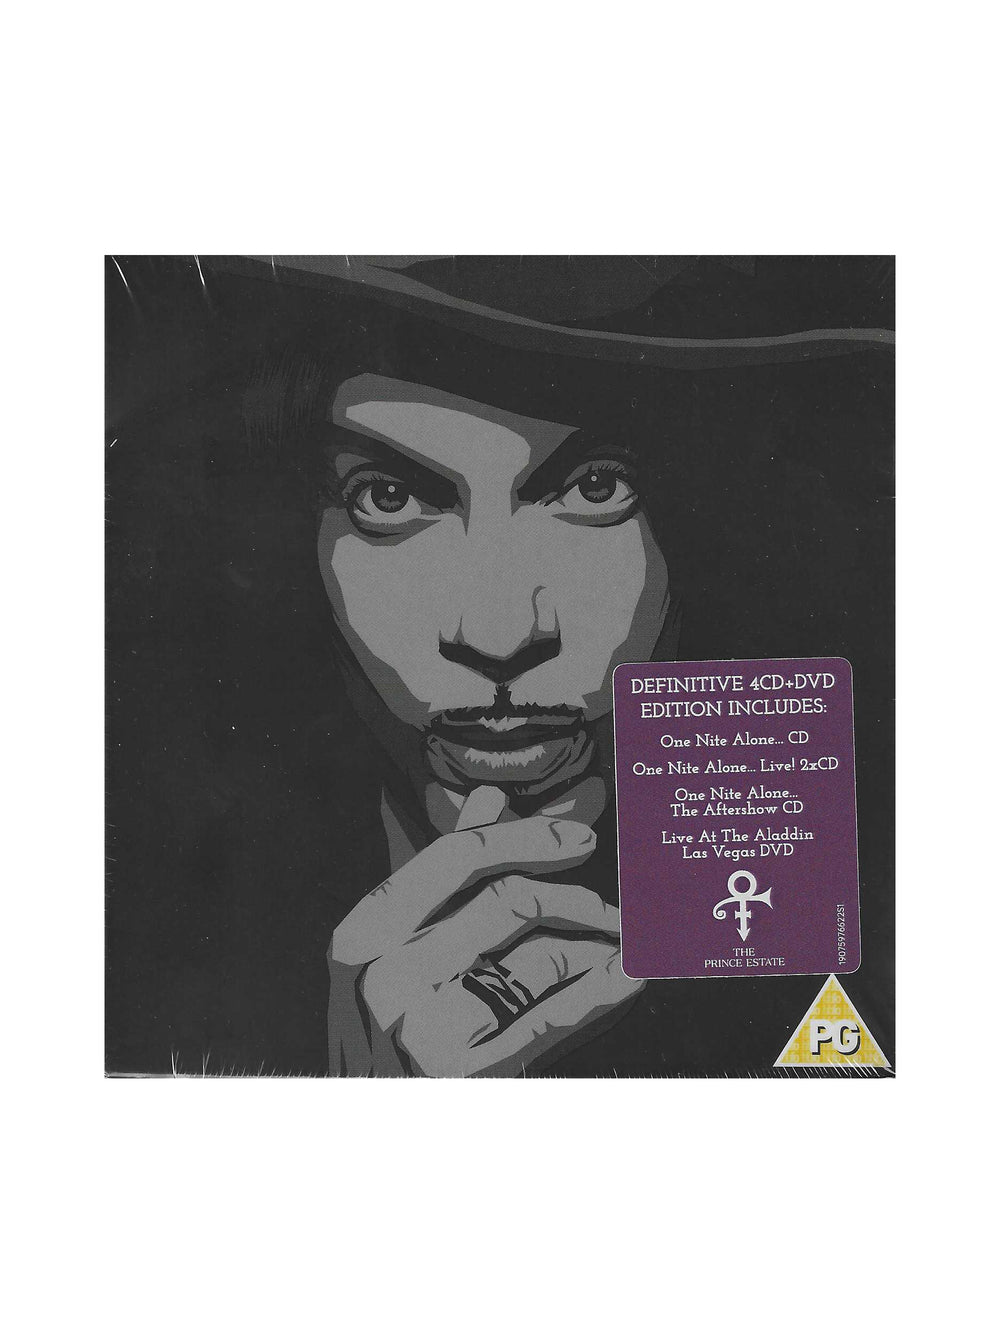 Prince – Up All Nite With Prince (The One Nite Alone Collection) 4 CD / 1 DVD Box Set Sony Legacy 2020